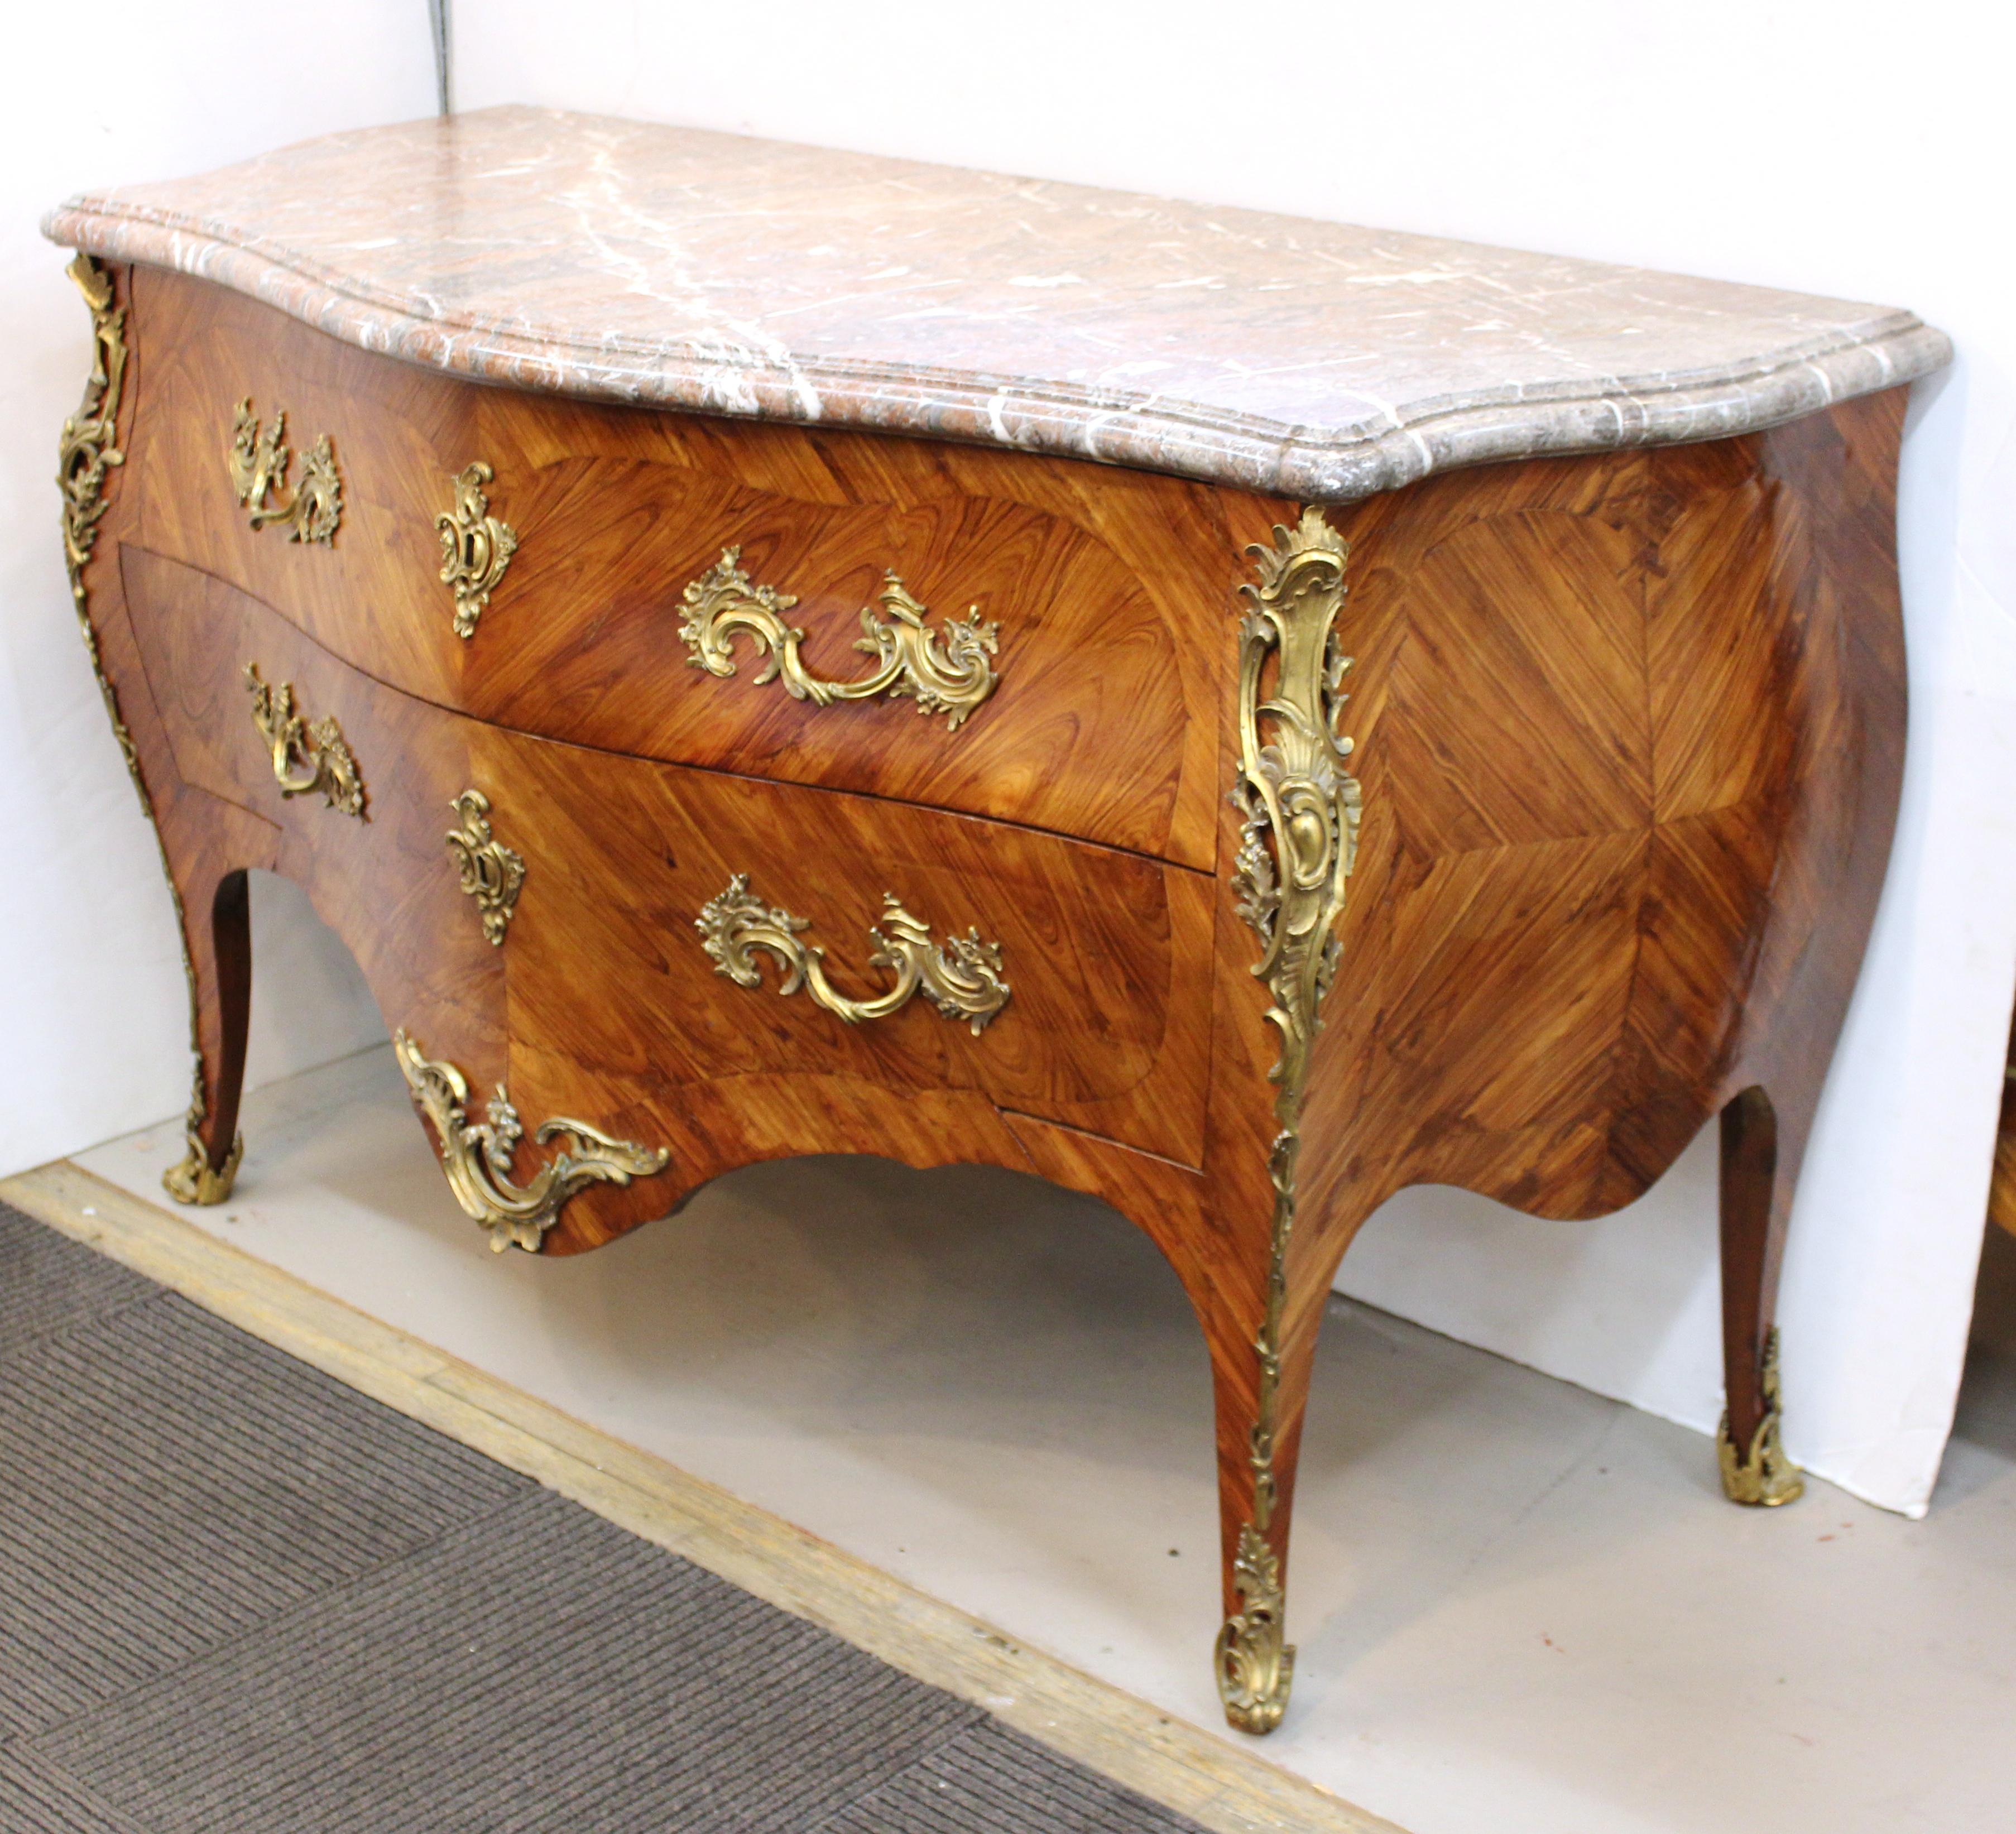 A French Louis XV period Kingwood veneer commode with ornate ormolu detailing, stamped with the obliterated signature of Joseph Schmitz and the mark of the Jurande.
The commode has a bombe contour and veneered in reverse-grained wood. Two drawers